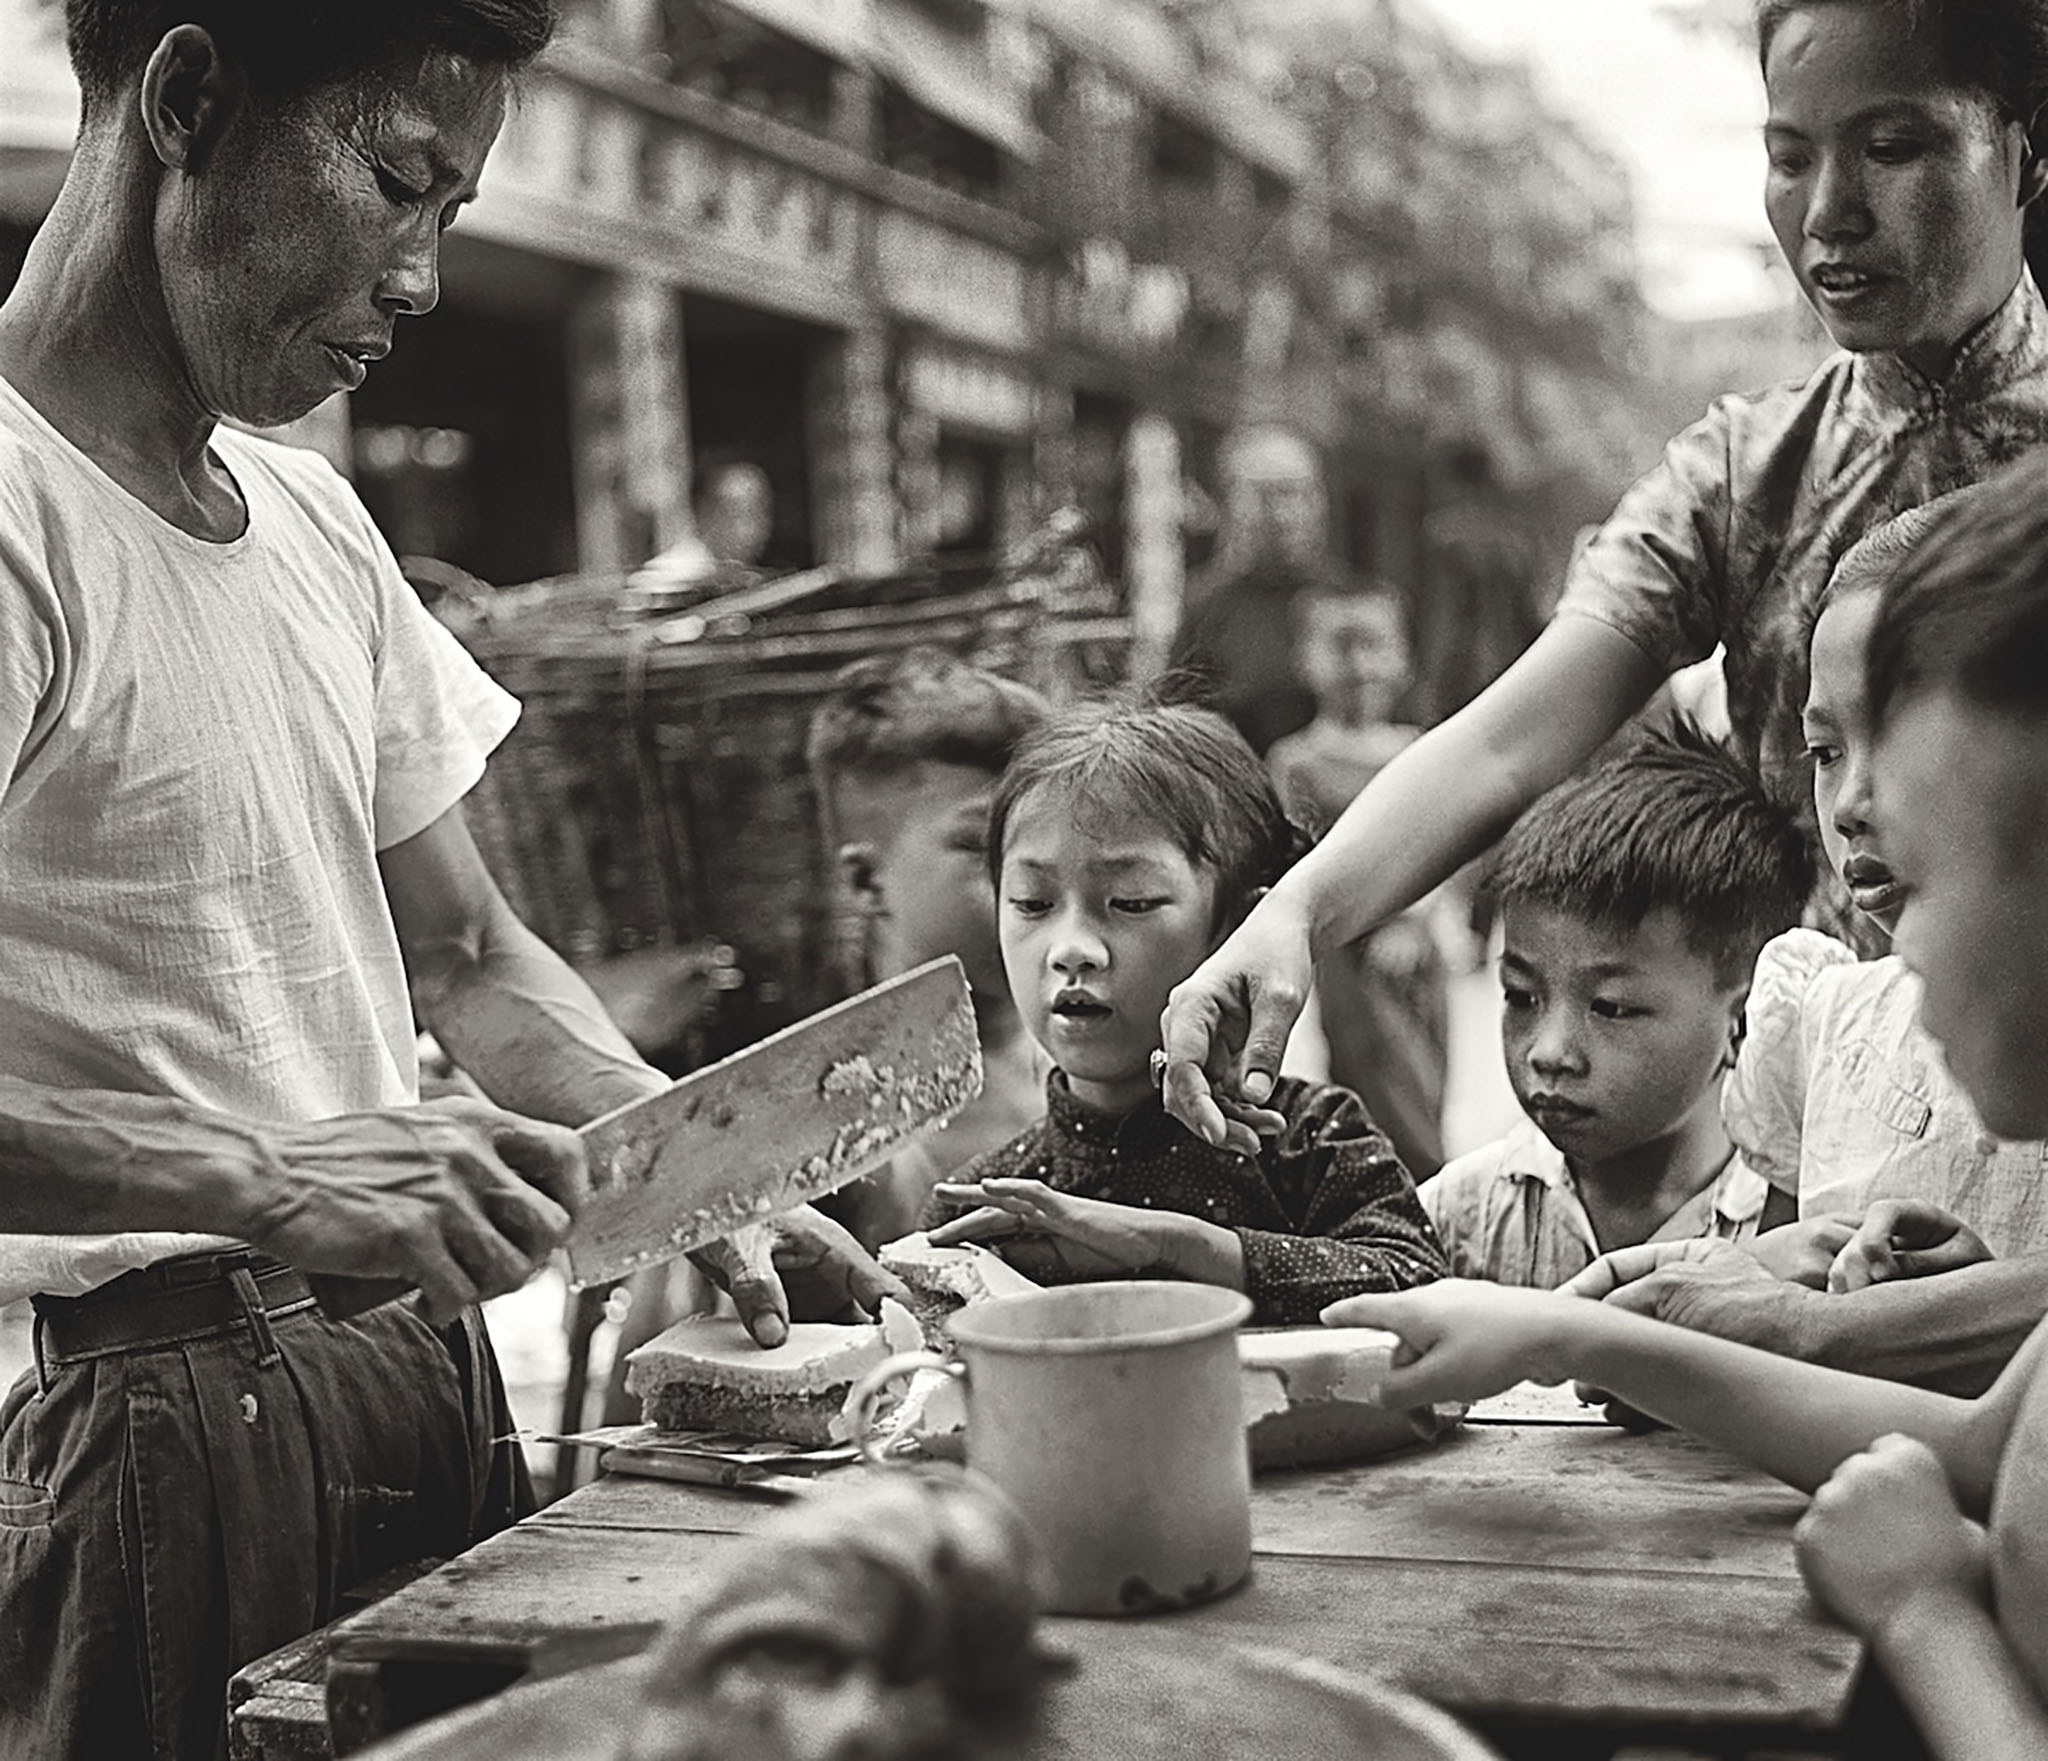 Fan-Ho-Cant-Wait貪嘴-Hong-Kong-1950s-and-60s-courtesy-of-Blue-Lotus-Gallery.jpg